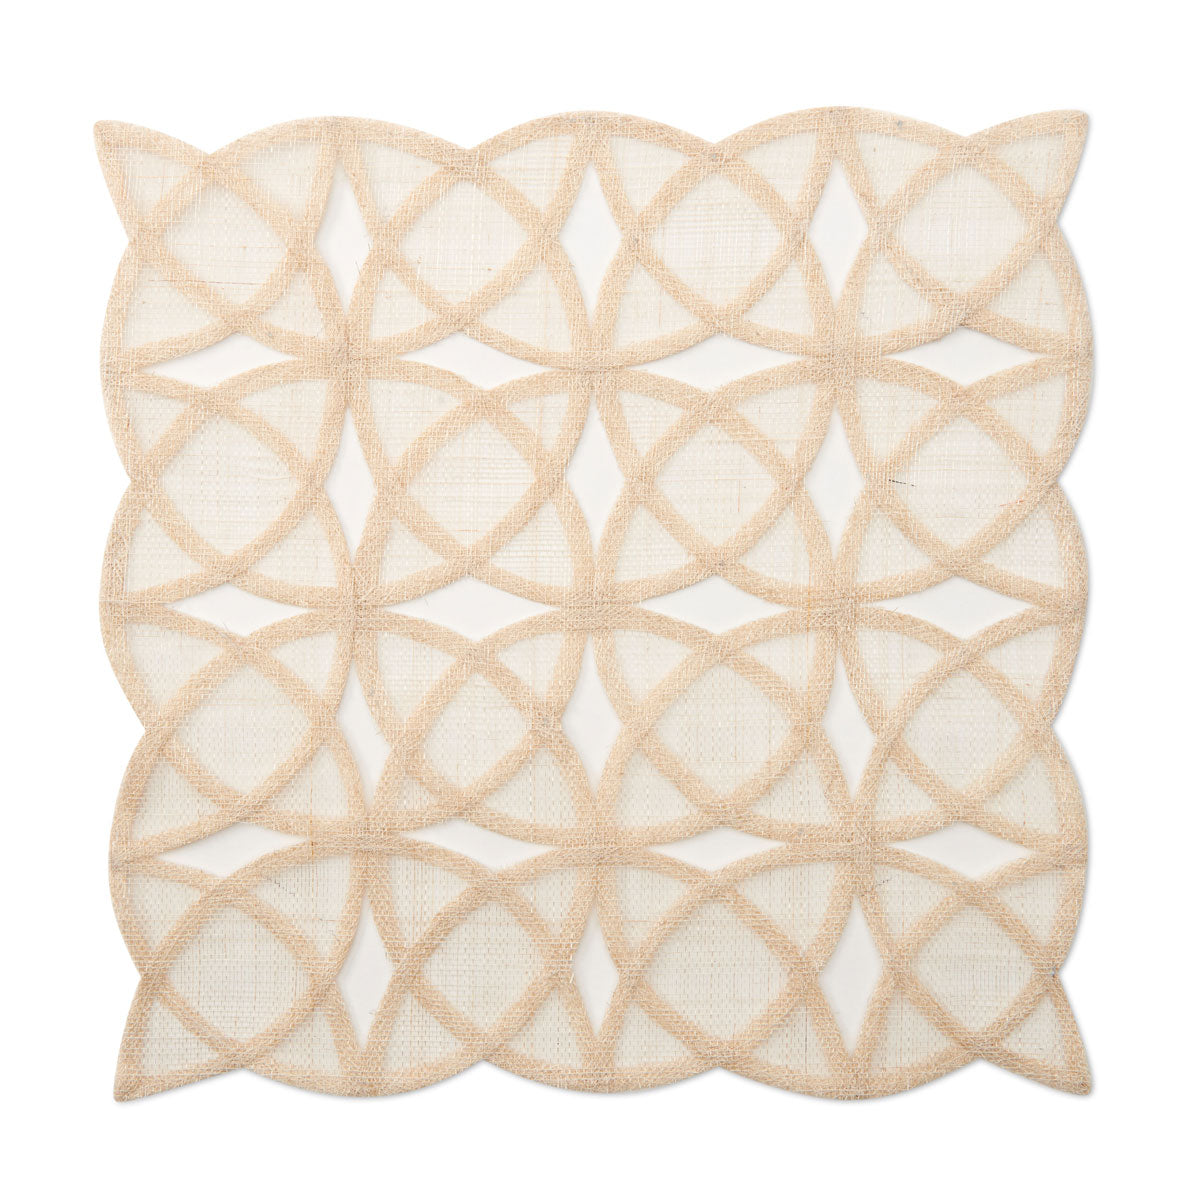 Sinamay Tile Placemat (S/4)